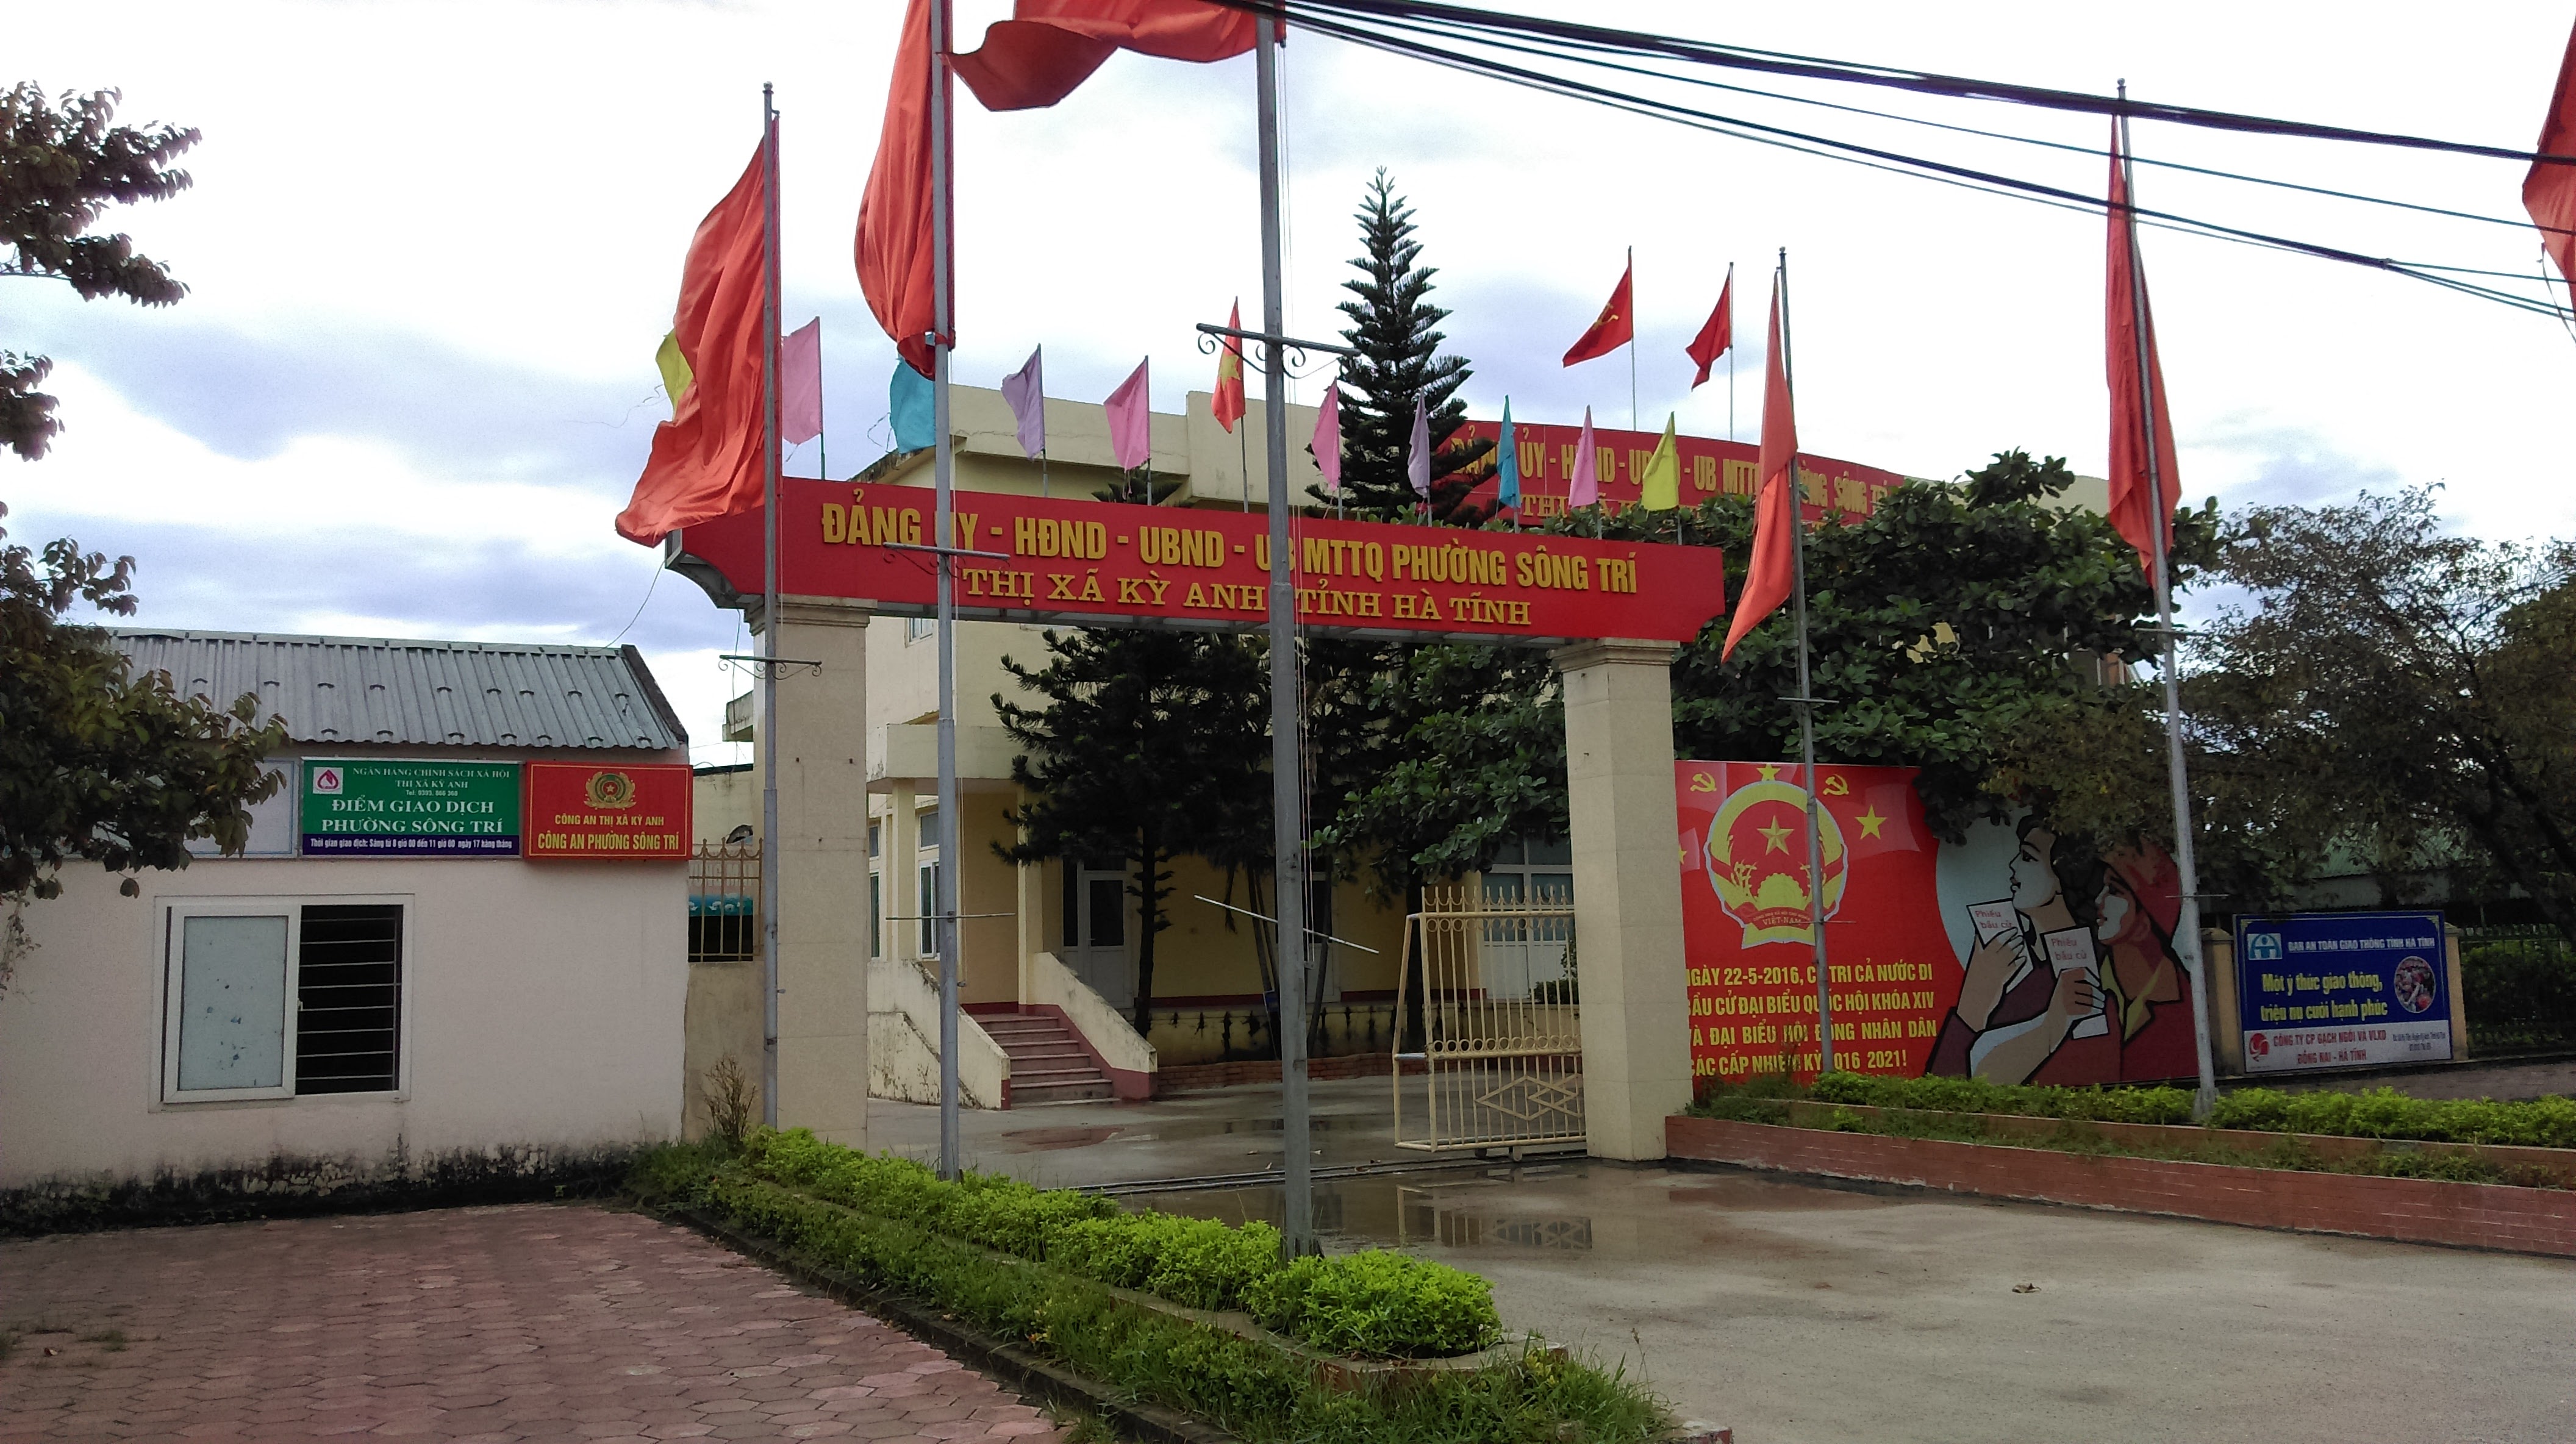 Image of List companies in Song Tri Ward- Ky Anh District- Ha Tinh